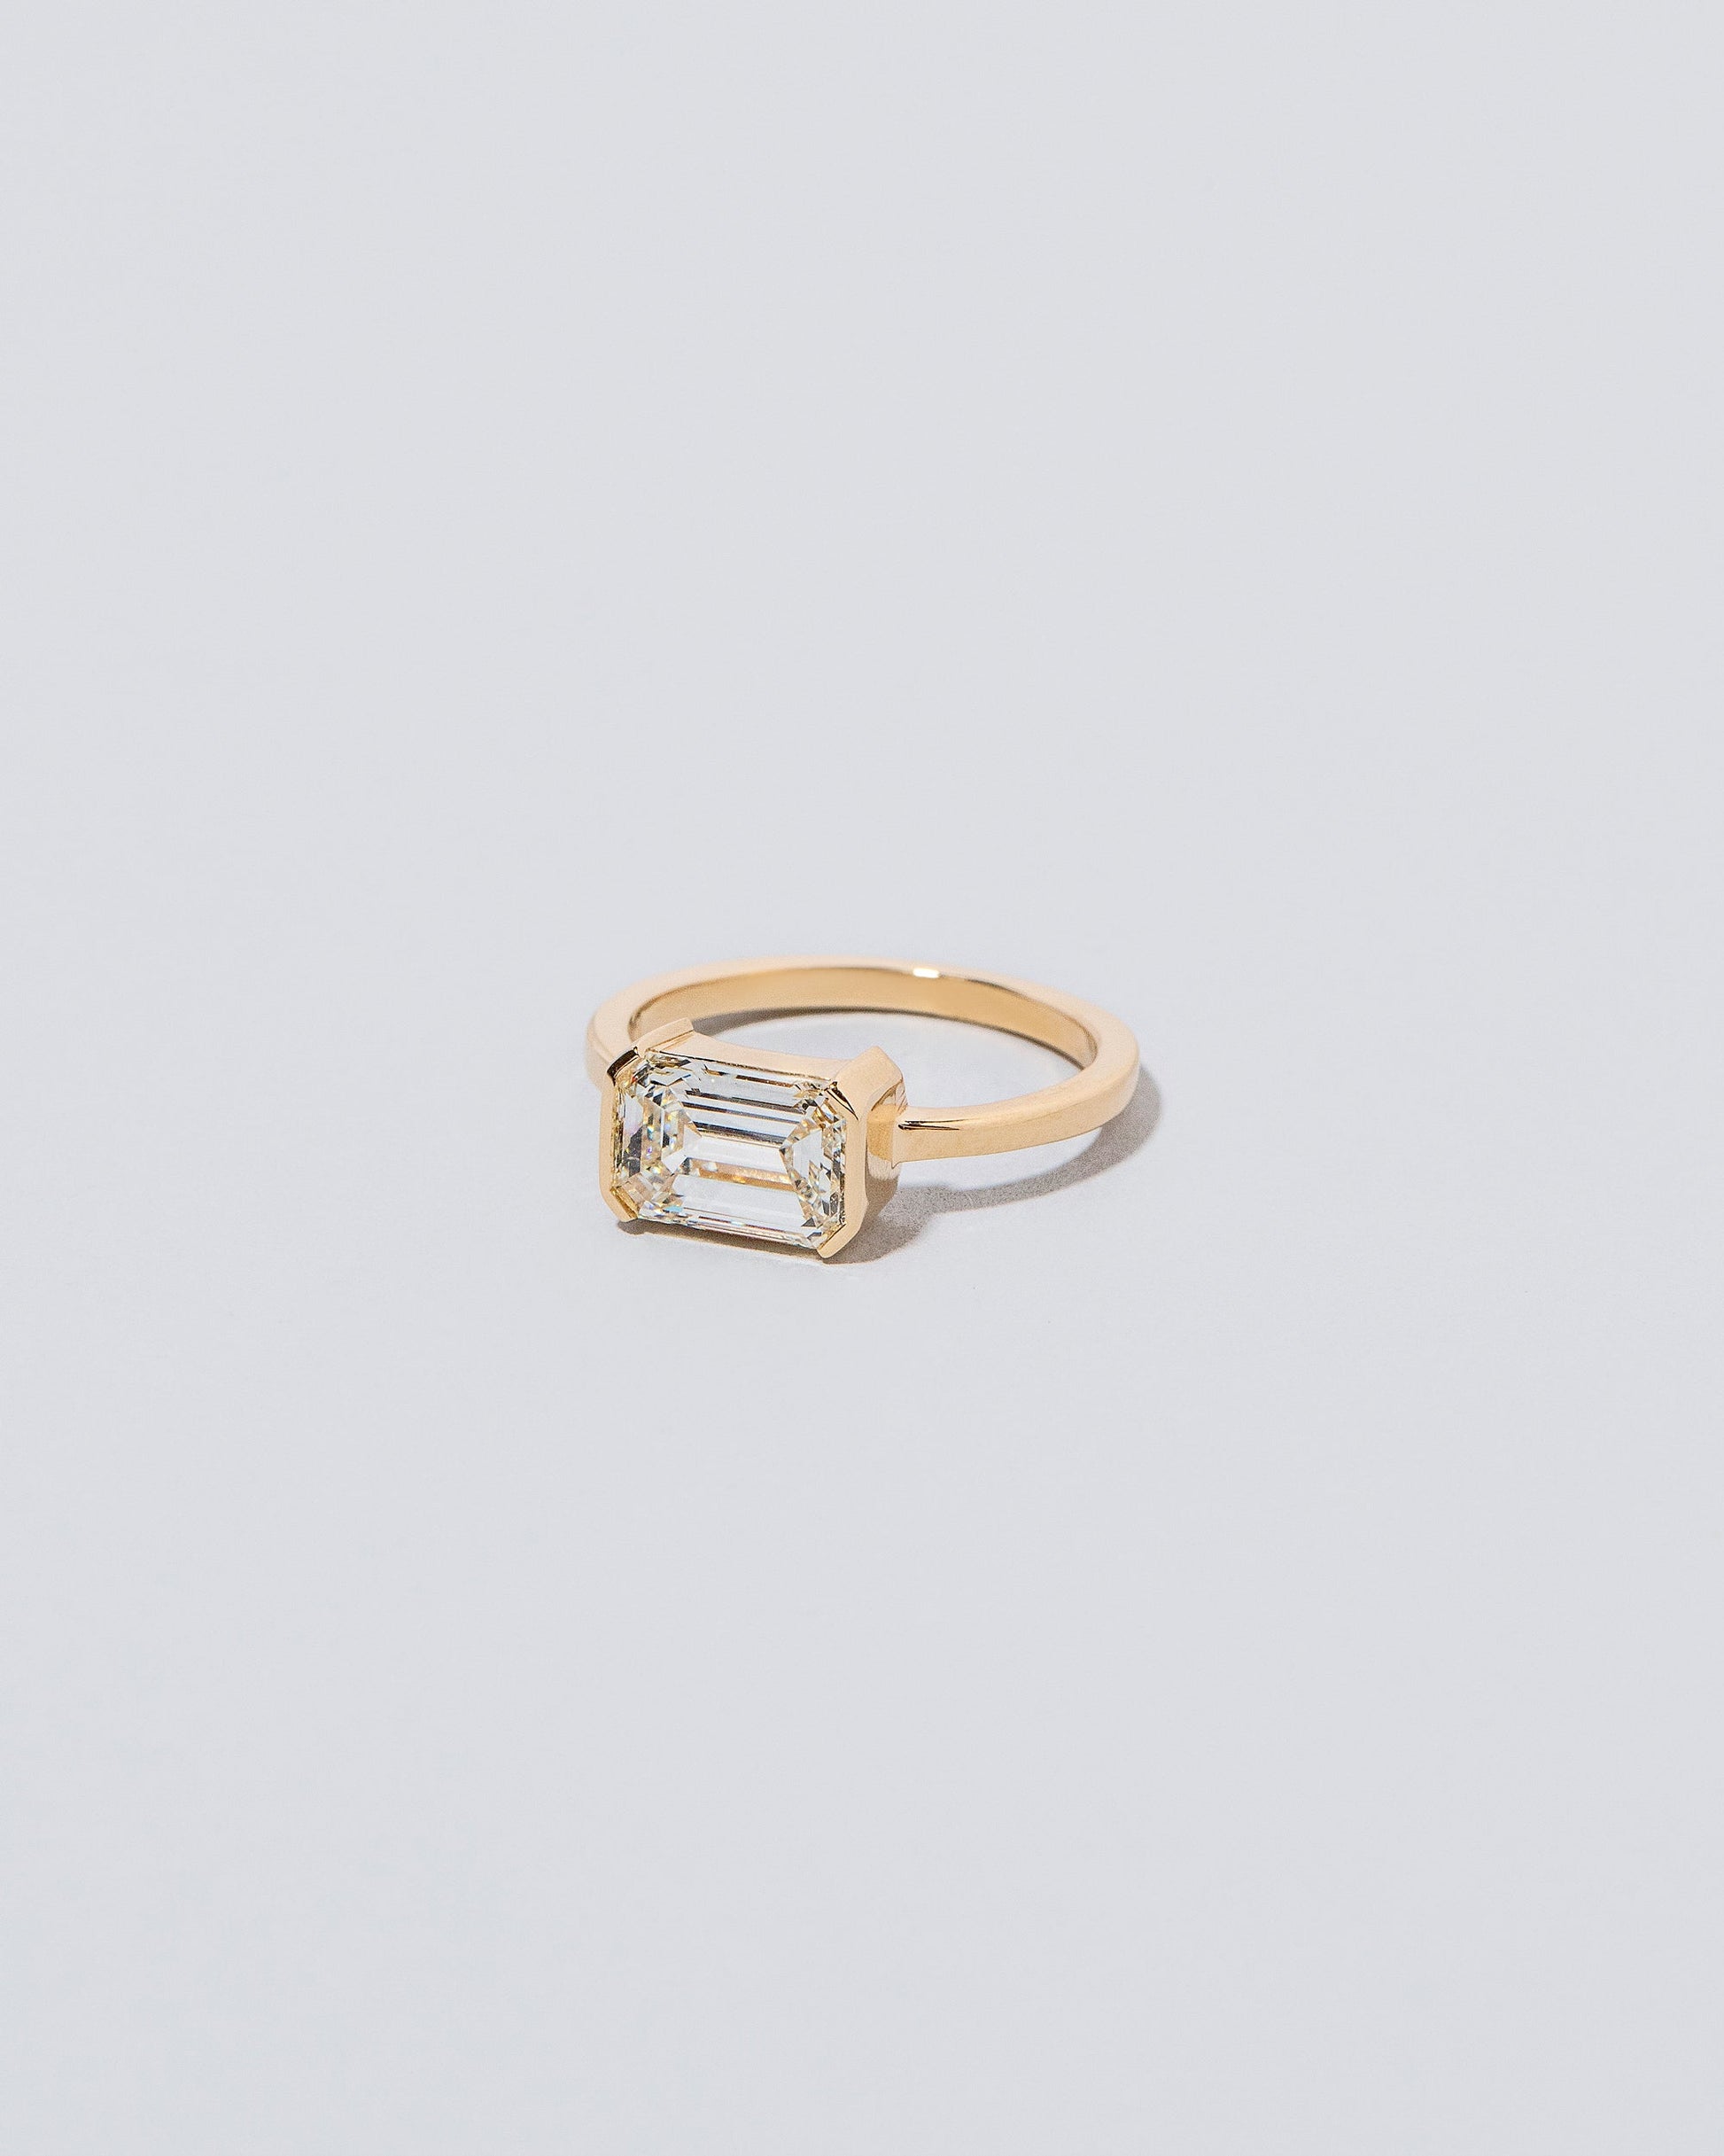 Terrace Ring on light colored background.